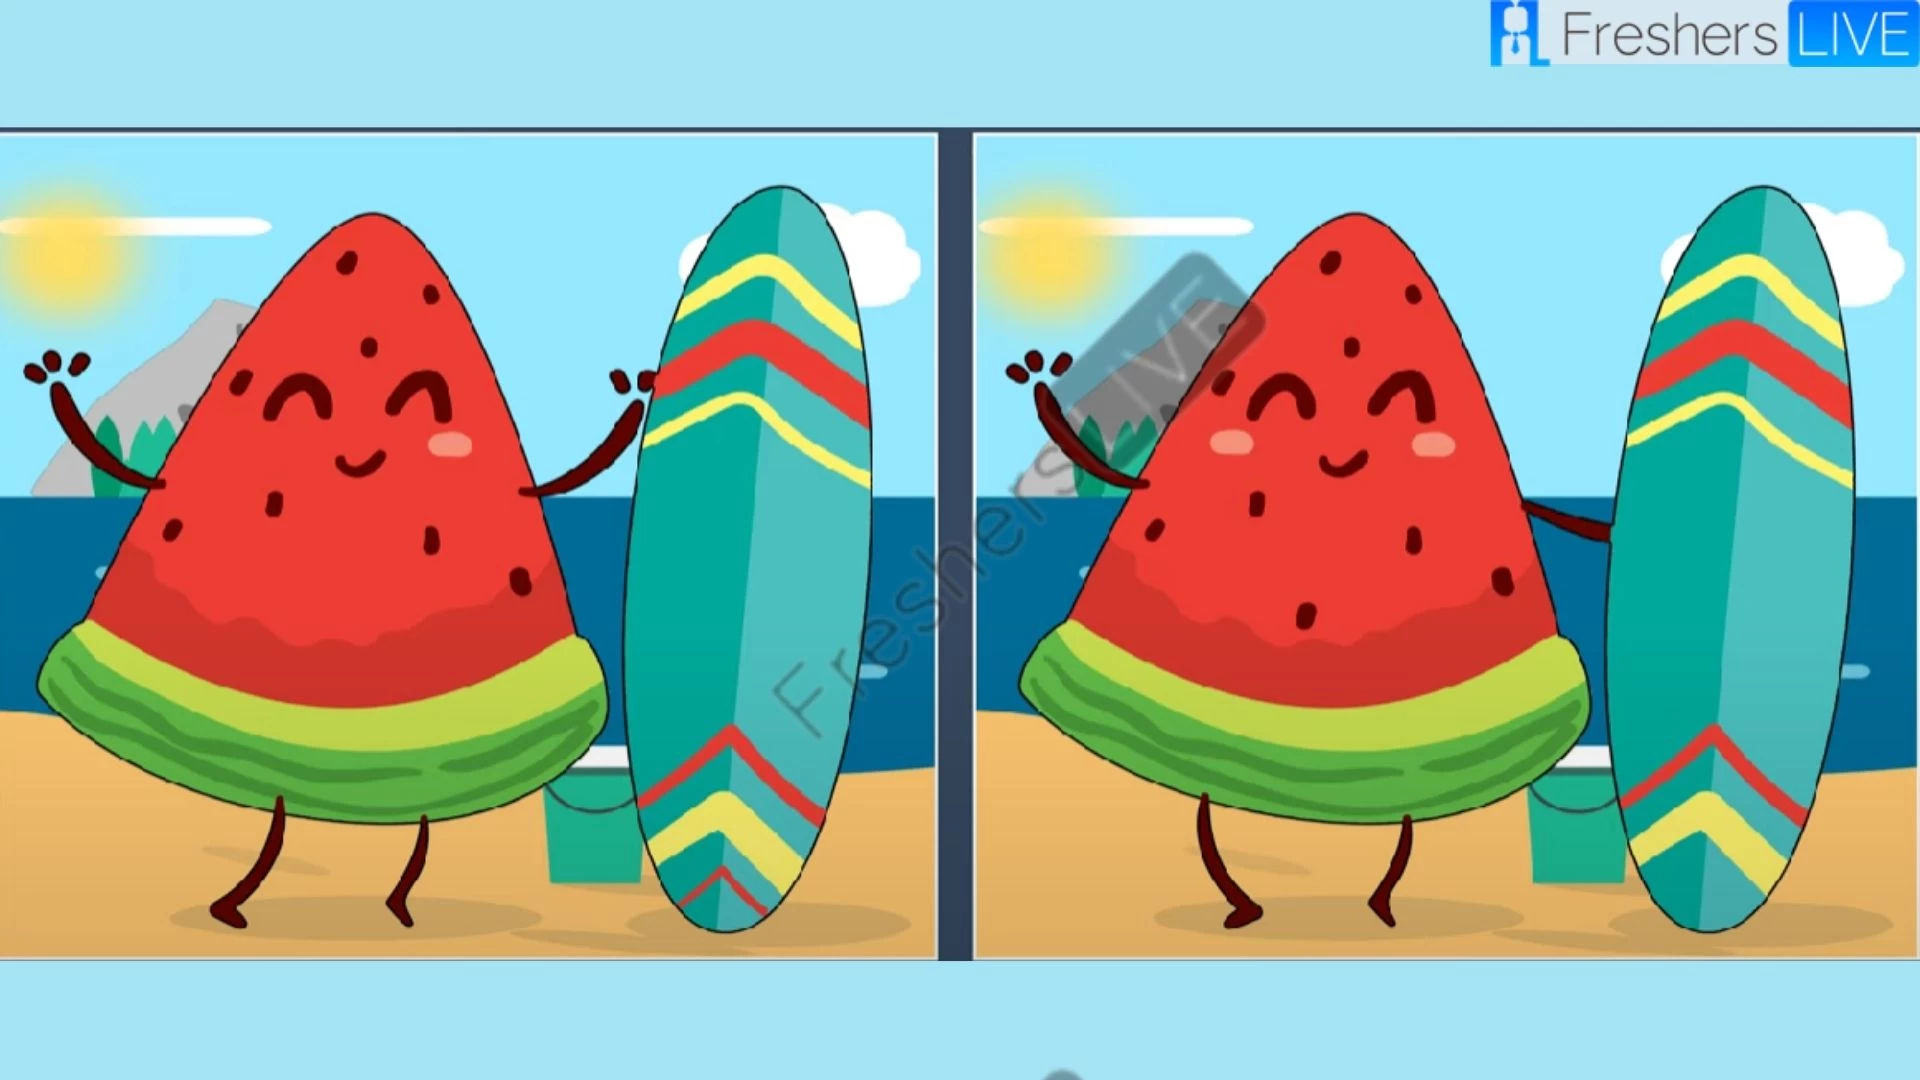 Only the most observant can spot 5 differences between the Watermelon pictures in 20 seconds.